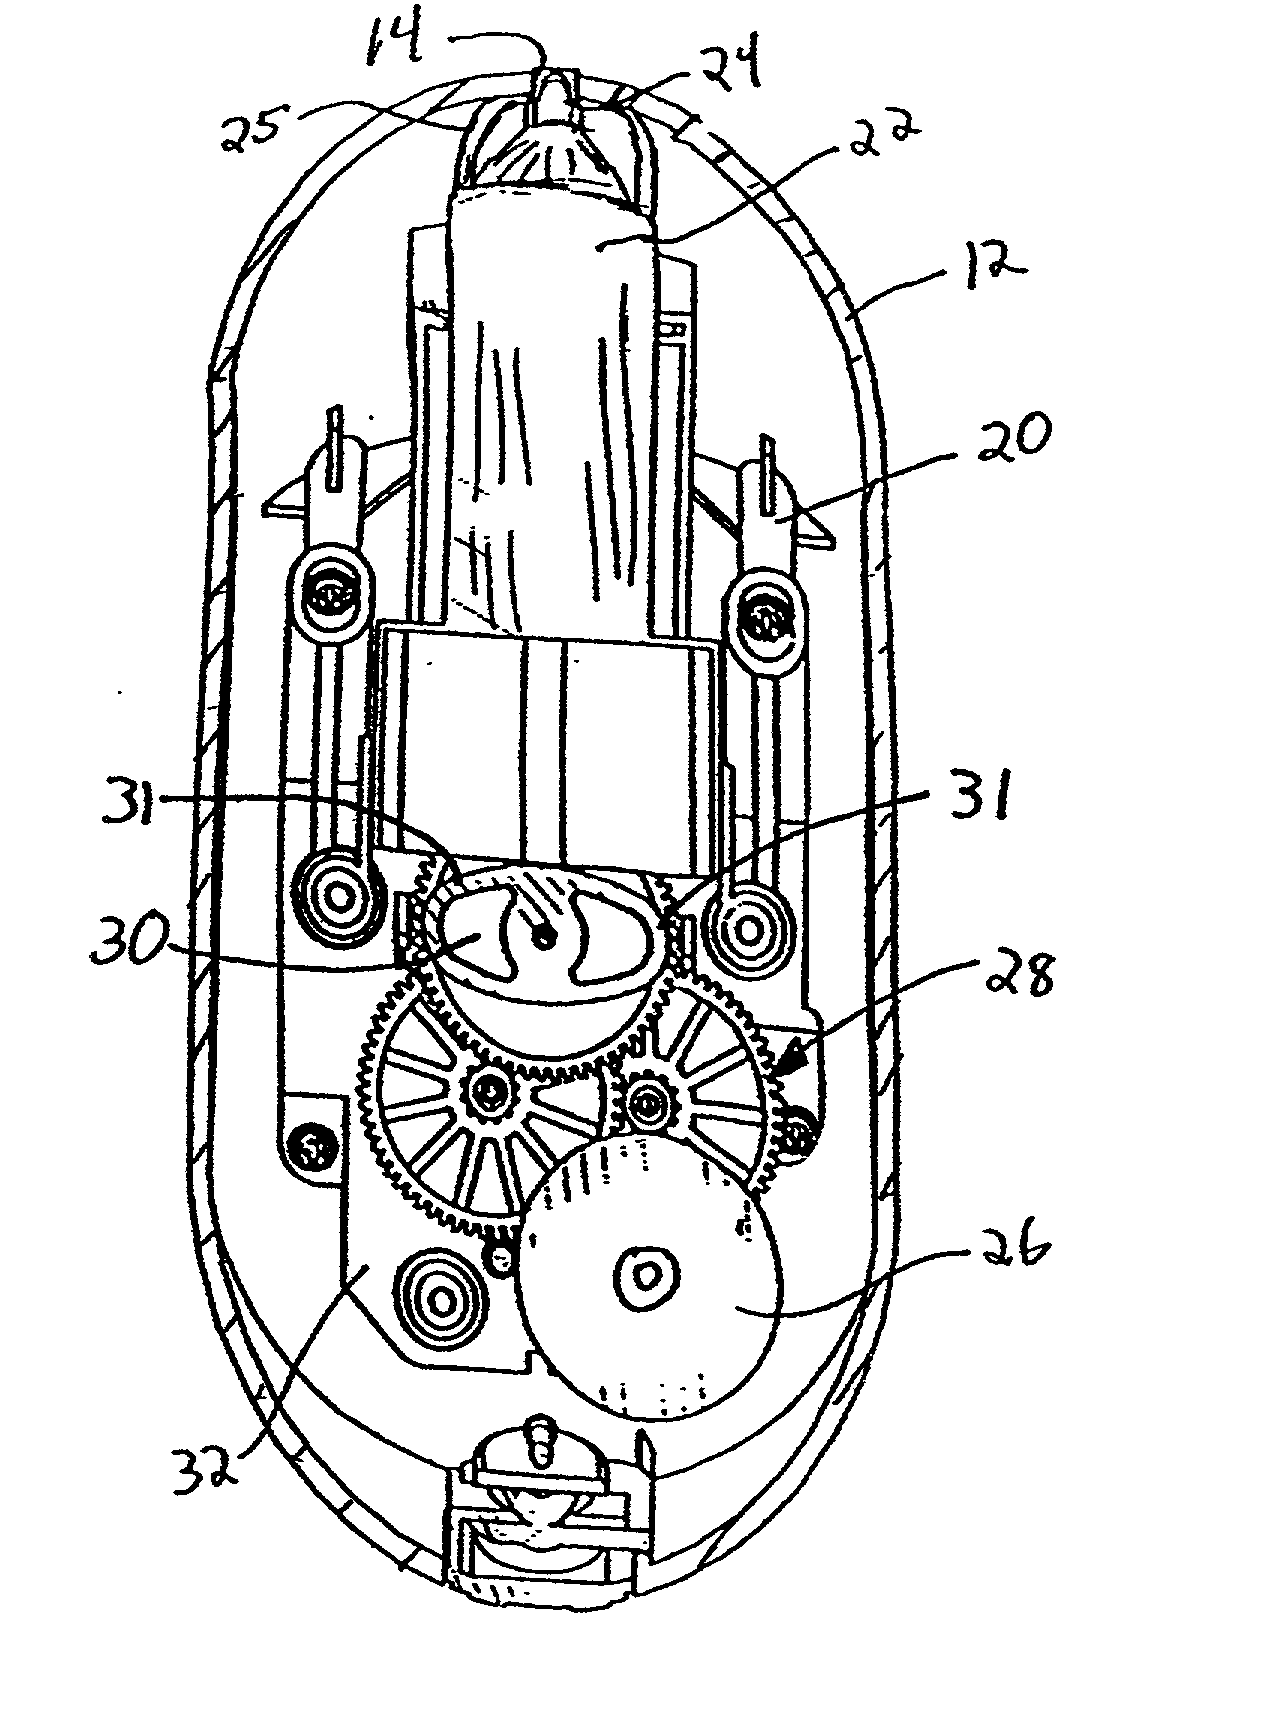 Automatic air freshener with dynamically variable dispensing interval